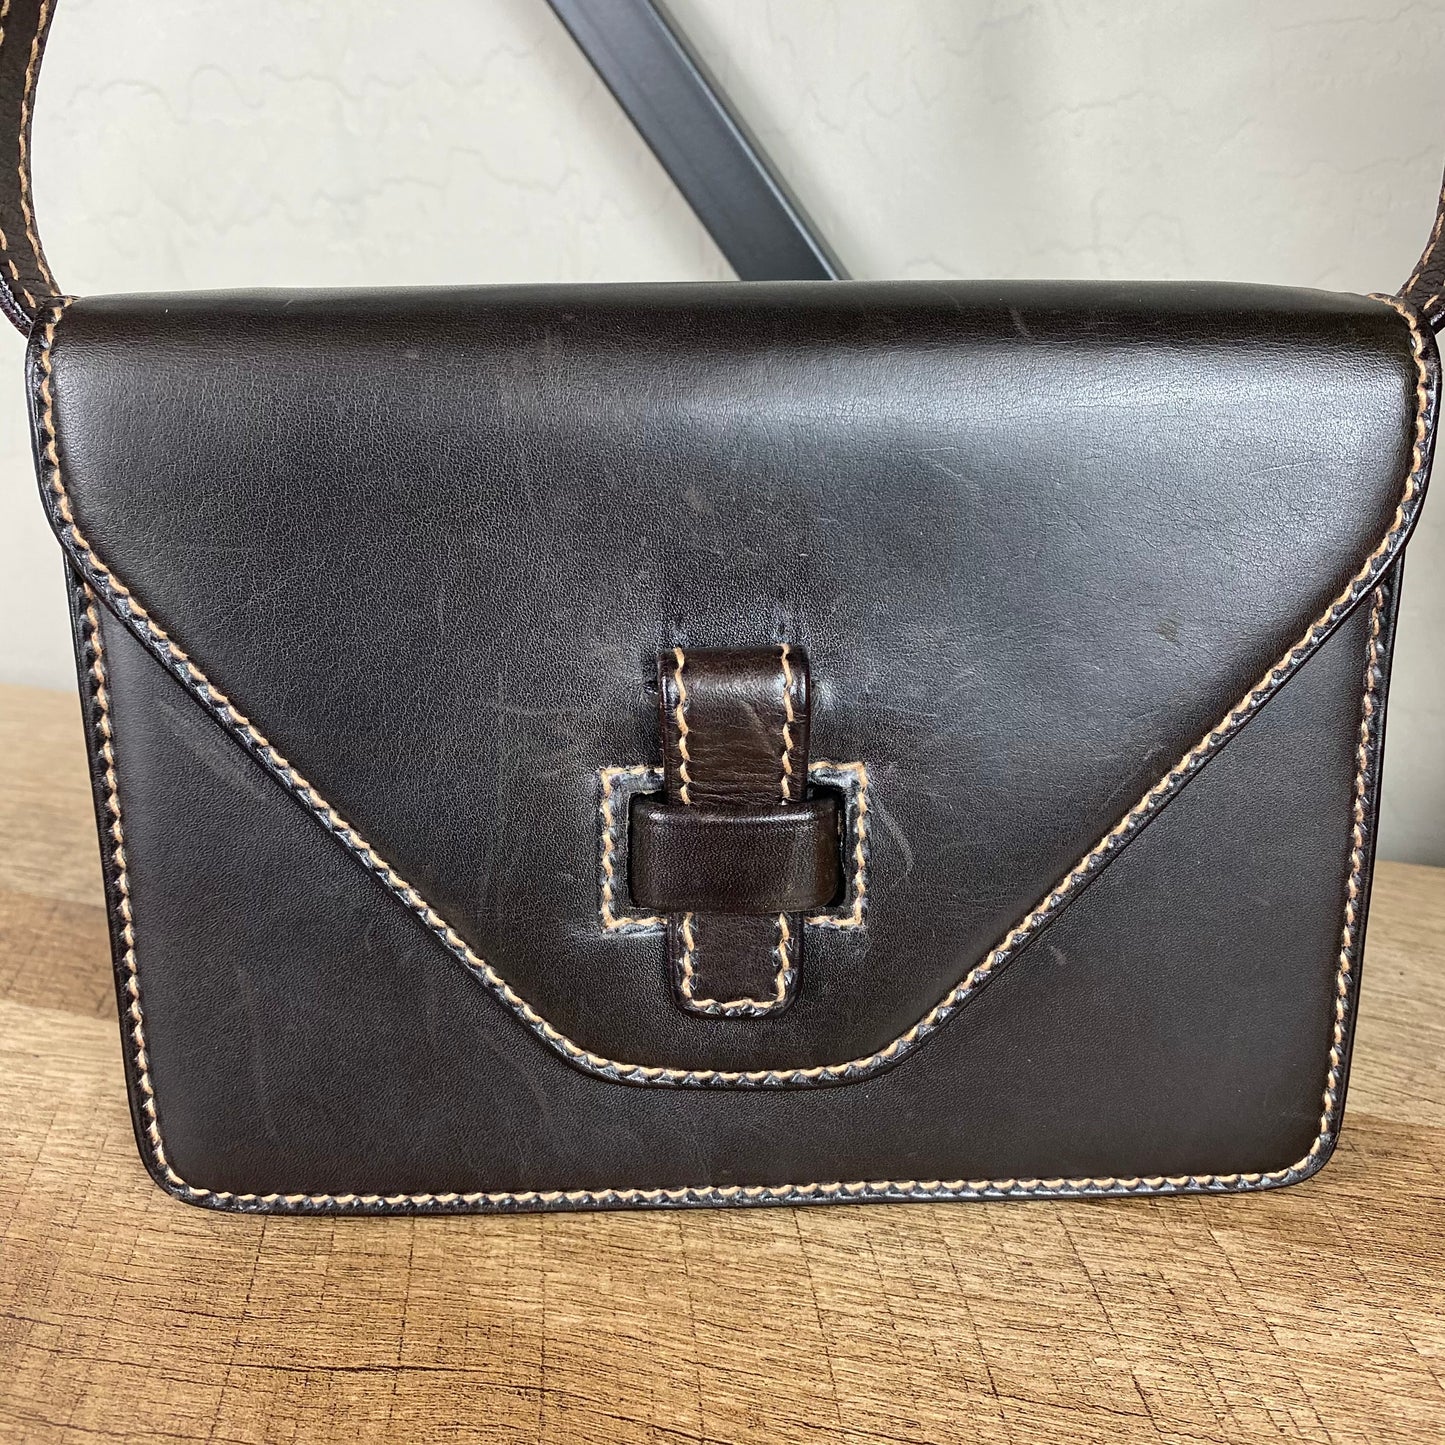 Gucci Stitched Leather Vintage Clutch Crossbody